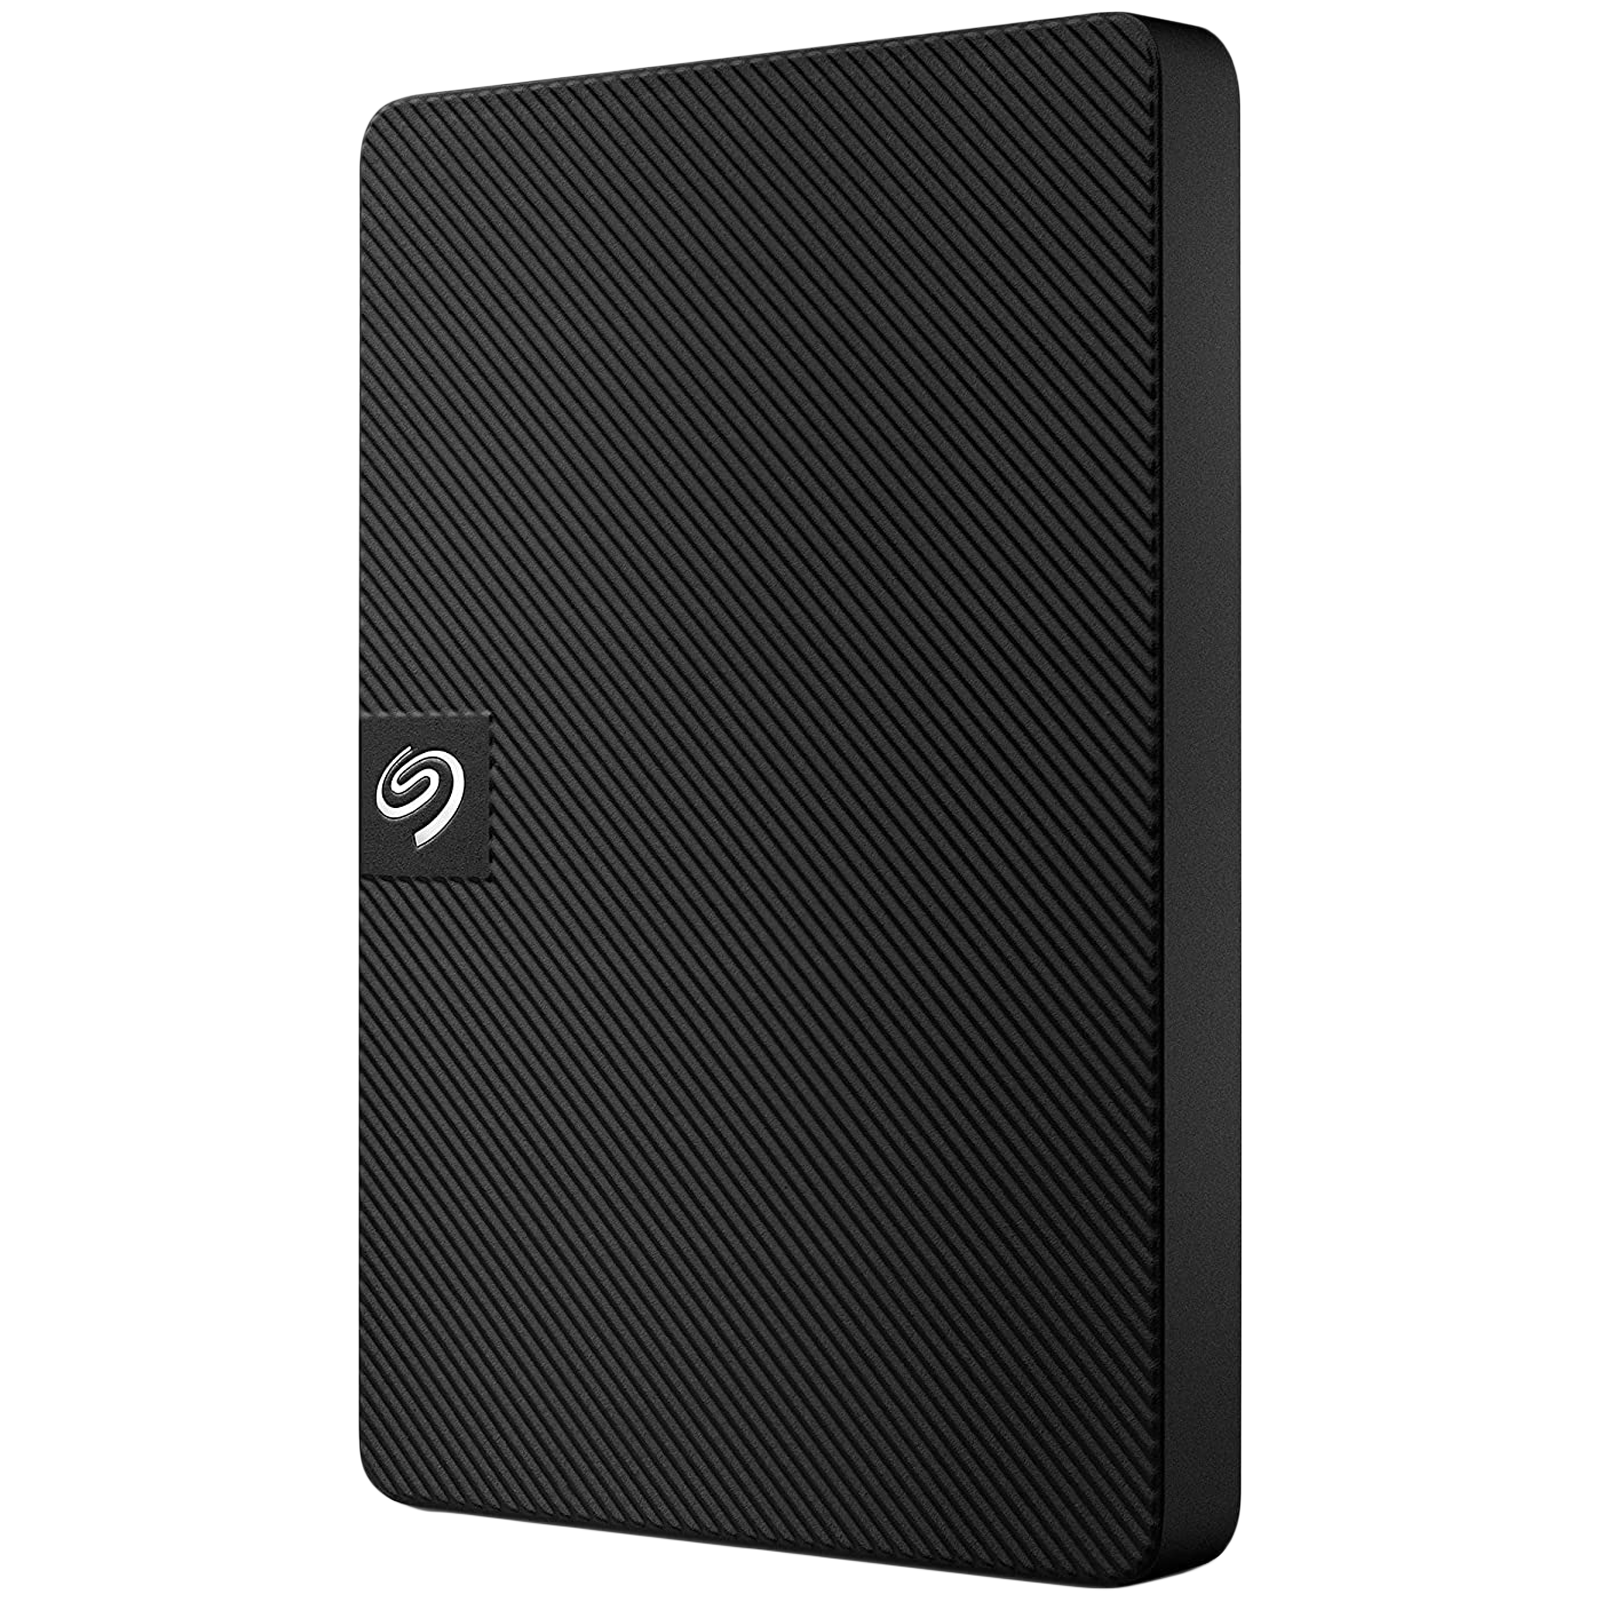 Seagate Expansion 1.5 TB USB 3.0 Hard Disk Drive (120 Mbps Read and Write Speed, STKM1500400, Black)_1